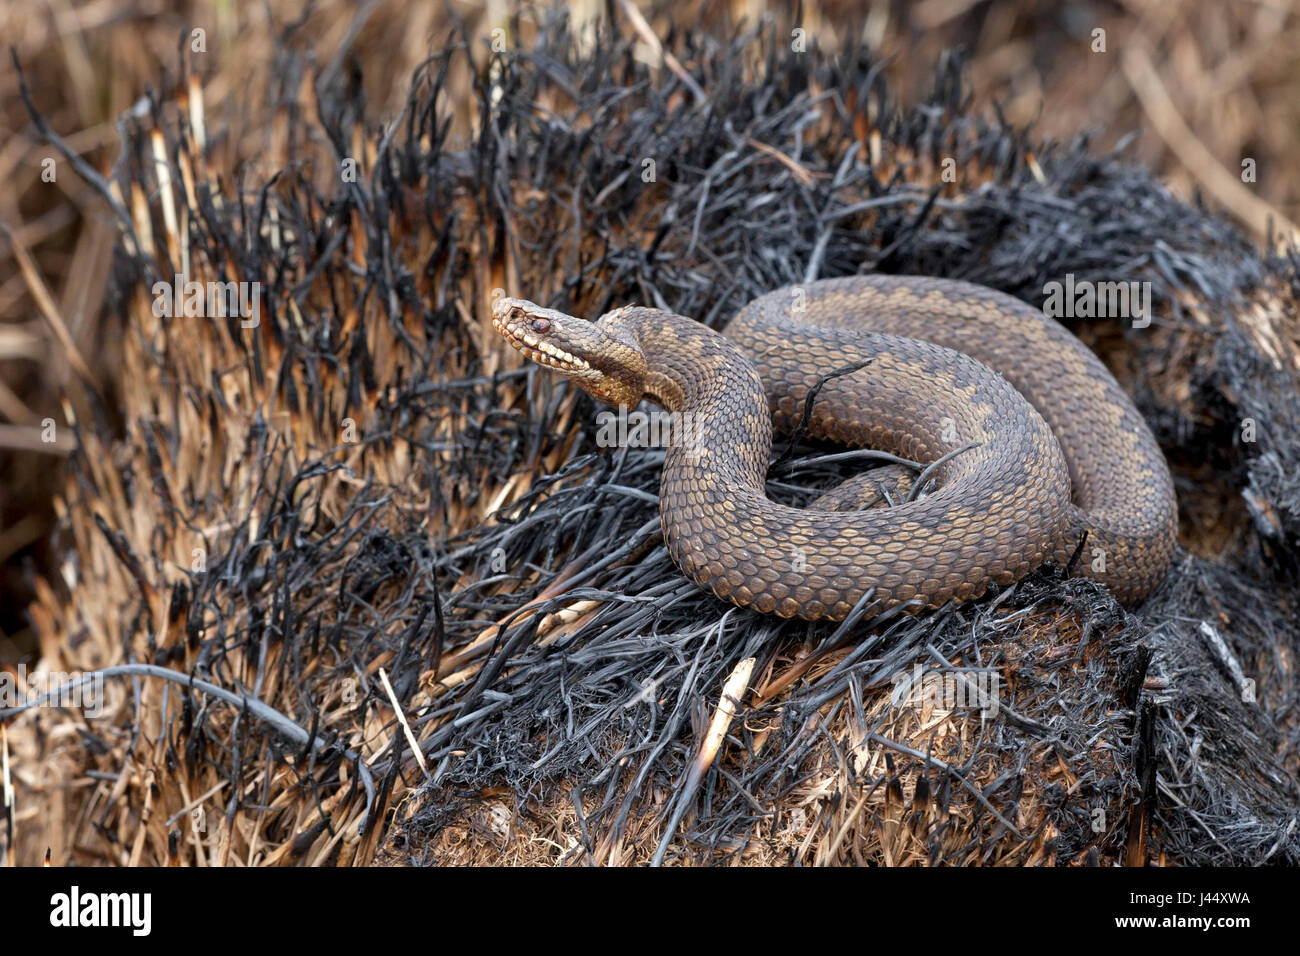 photo of a viper that survived the fire in the fochterloerveen Stock Photo